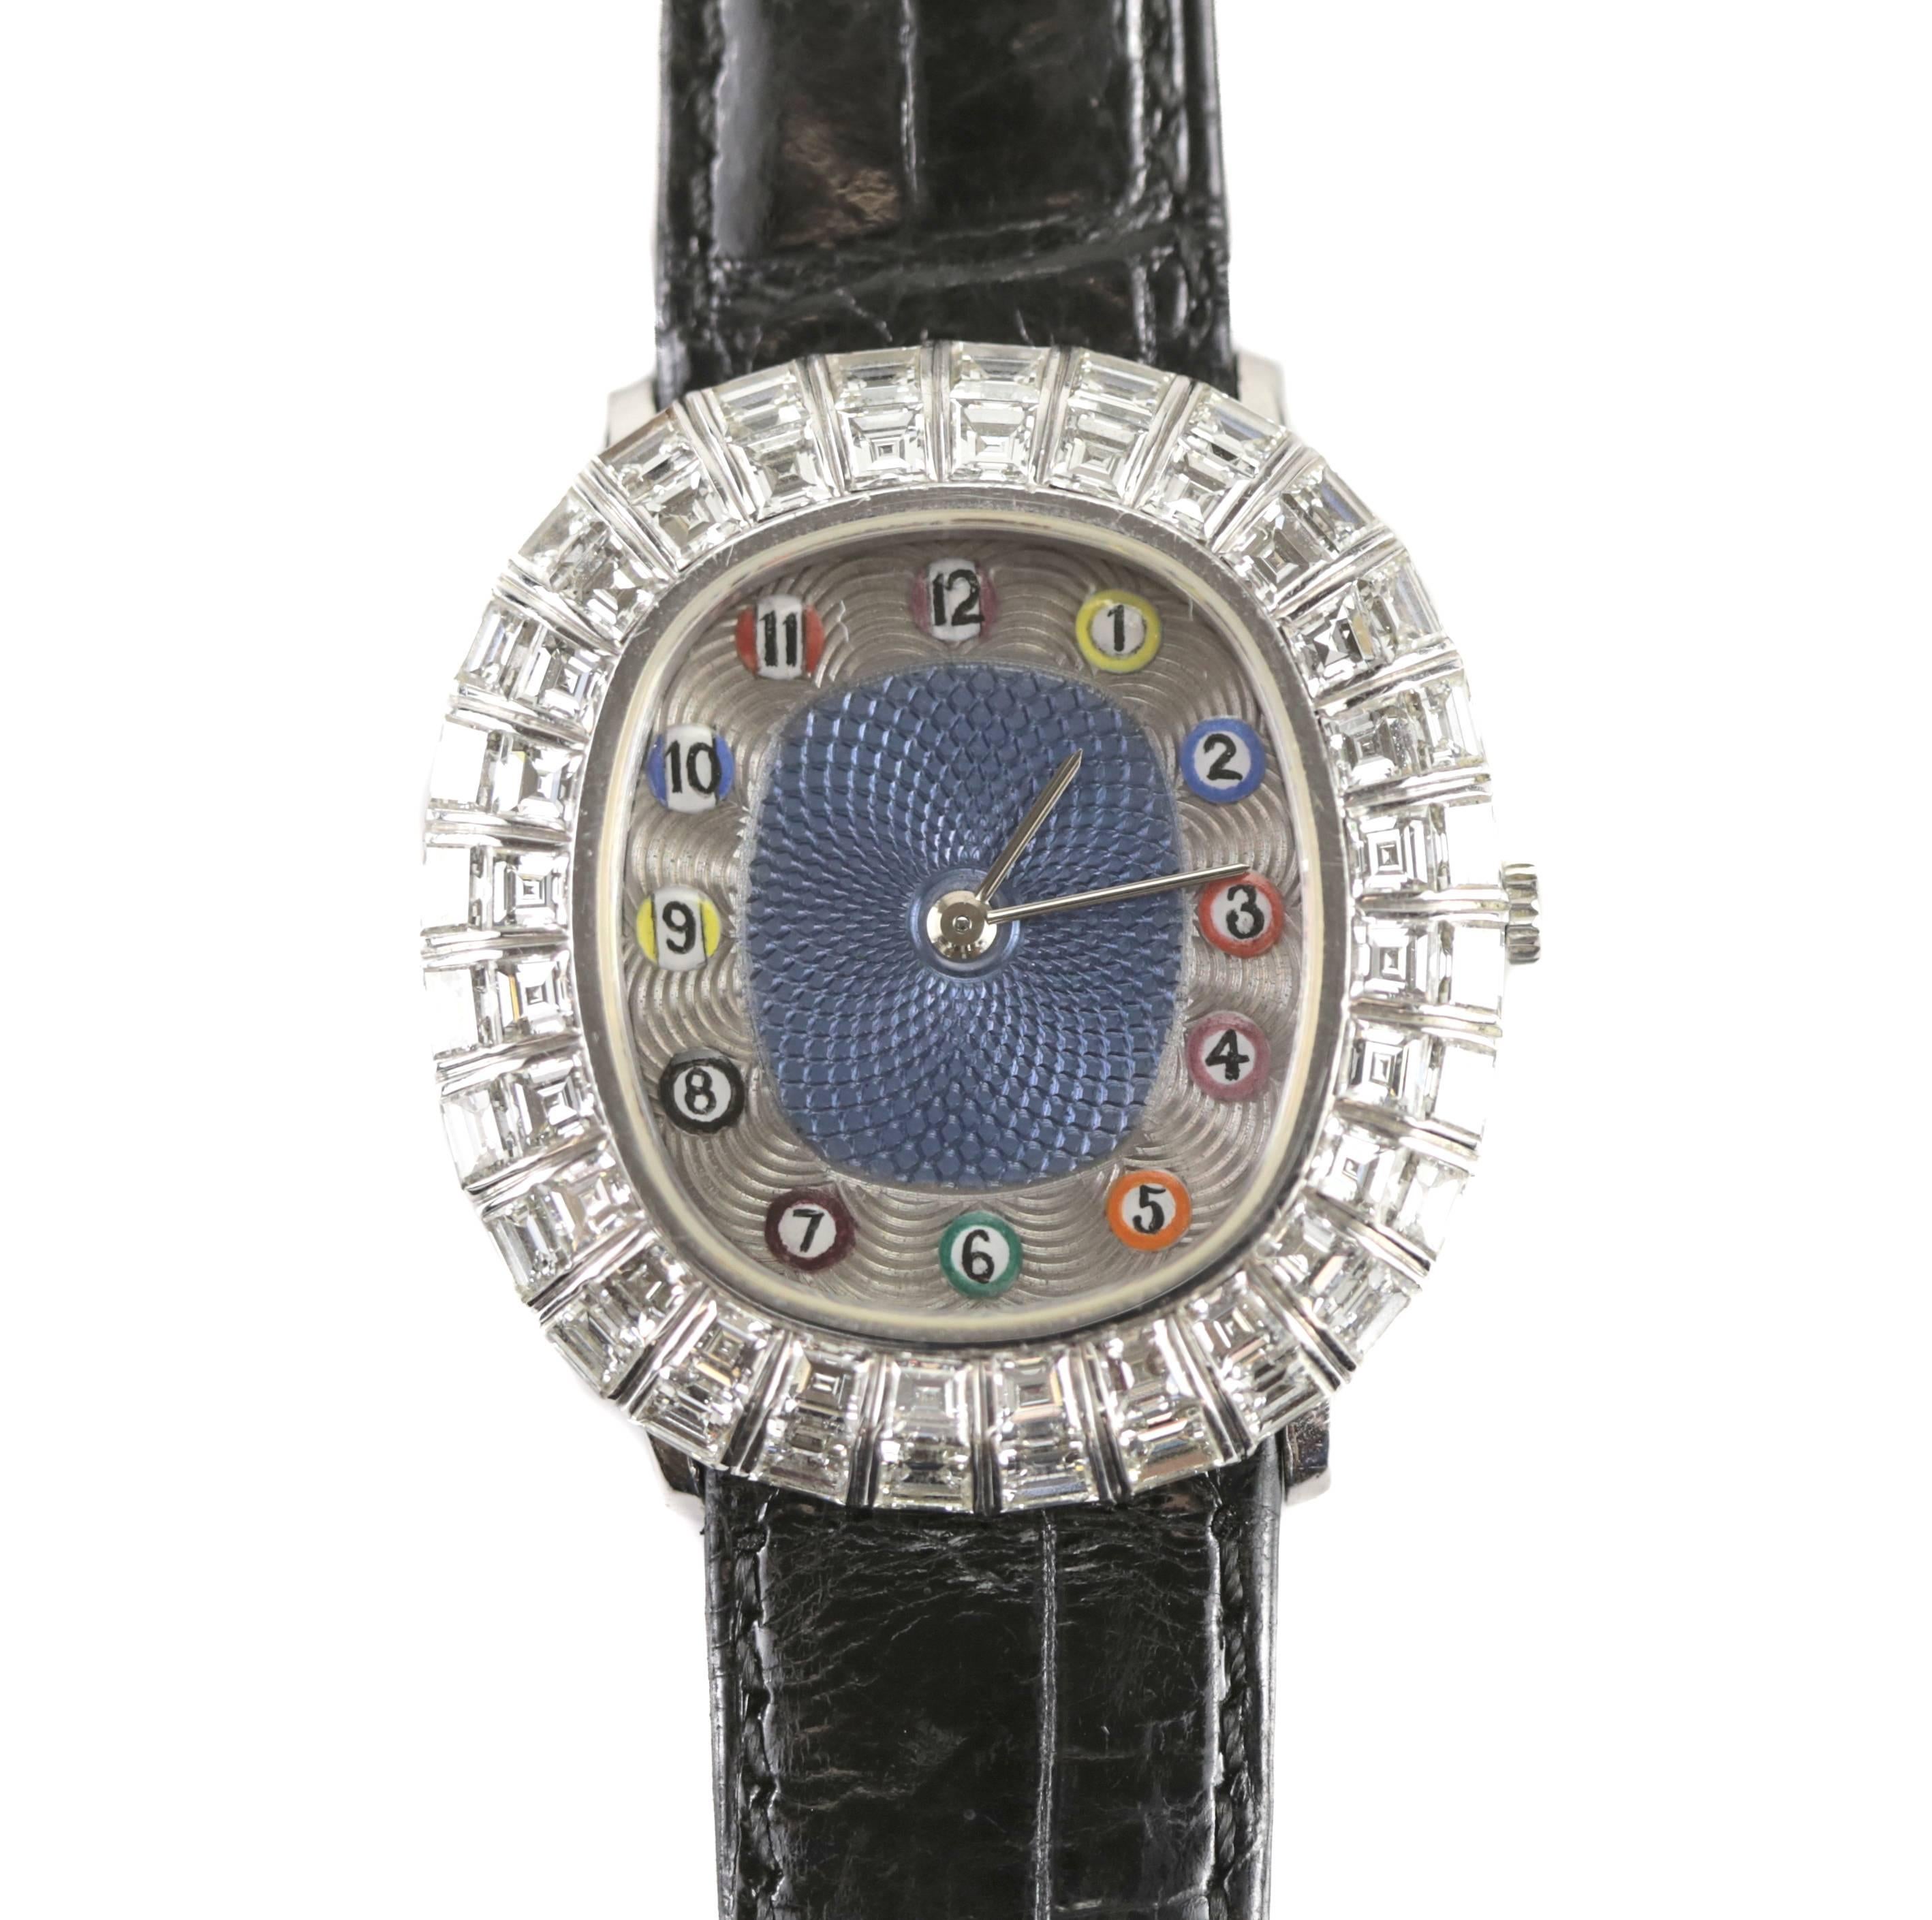 A fine limited edition 1/1 wristwatch by Audemars Piguet, D34442. A rare themed watch with the enamel numerals taking the form of POOL table or billiards balls. The bezel with blue engine turned enamel, engraved silvered chapter ring and Arabic